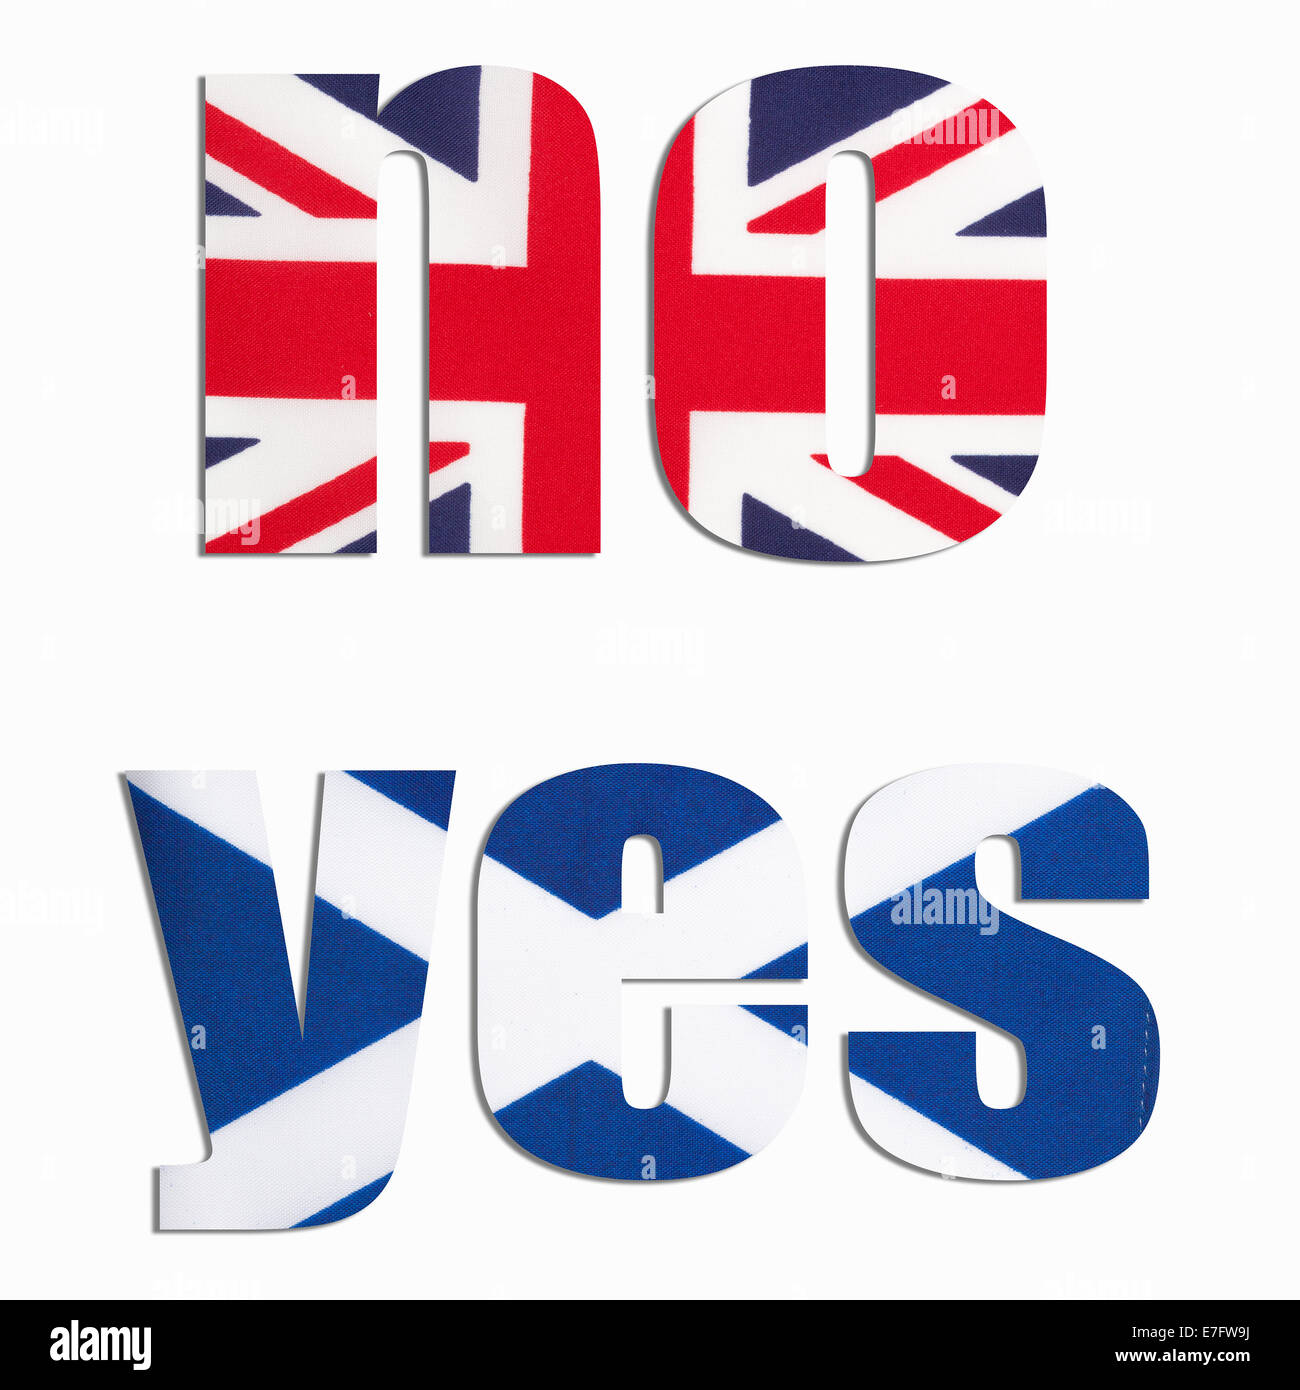 The choices in the Scottish Independence Referendum. The result was a NO for Independence. Scotland is still part of the UK. Stock Photo